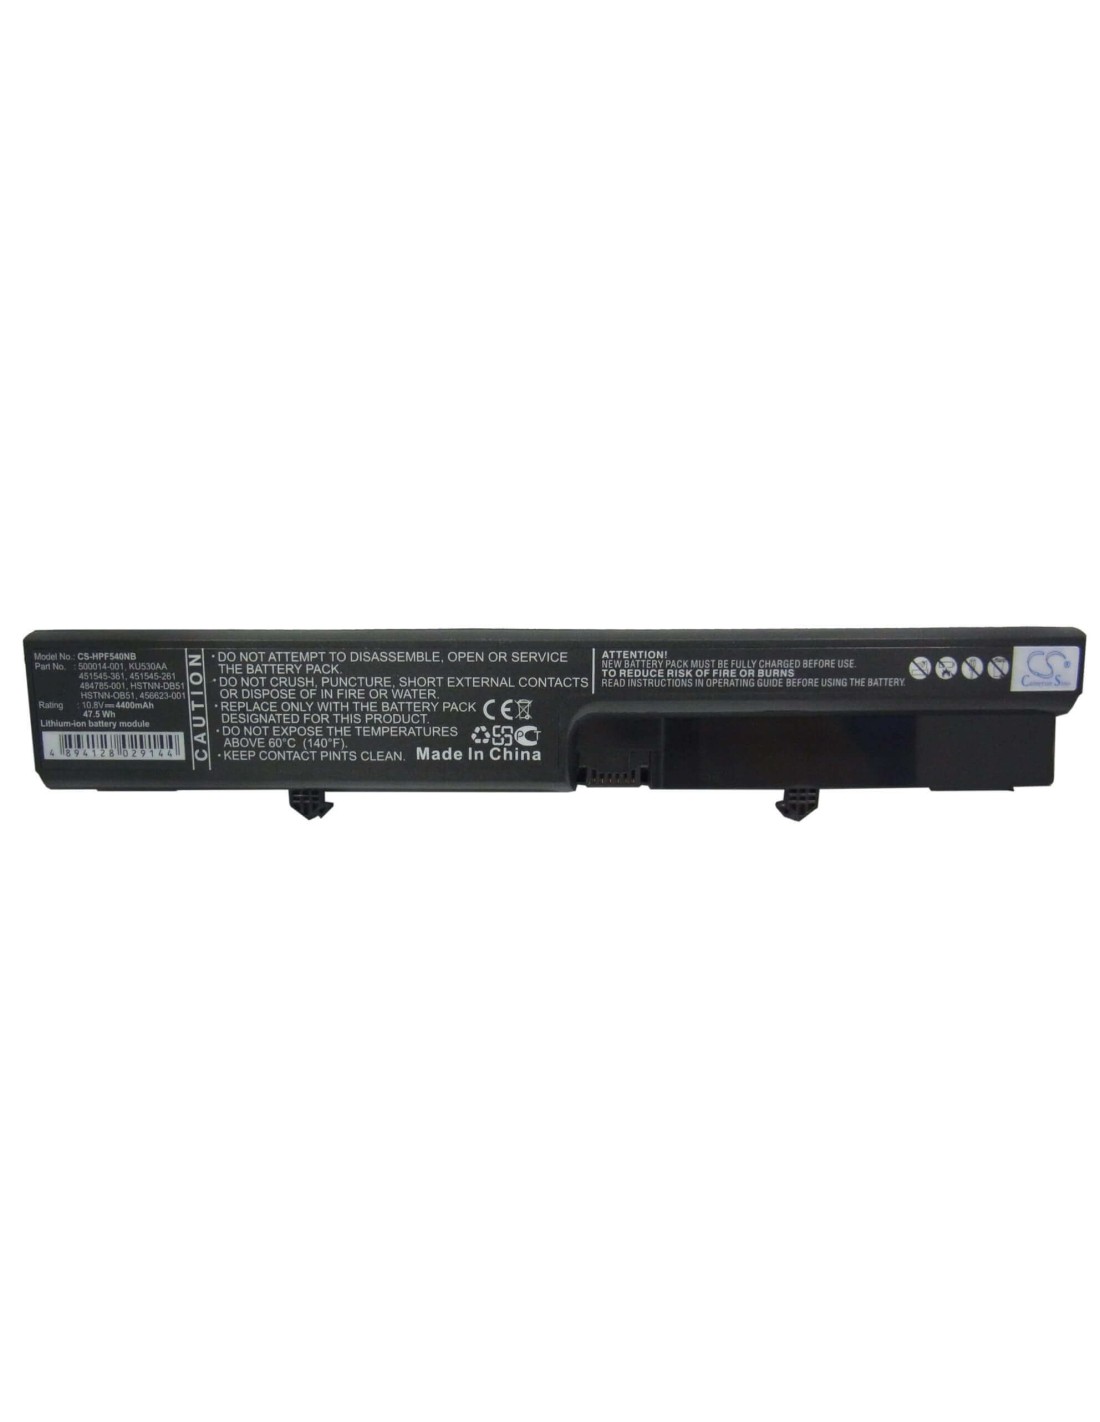 Black Battery for Compaq Business Notebook 6530s, Business Notebook 6535s, Business Notebook 6520s 10.8V, 4400mAh - 47.52Wh